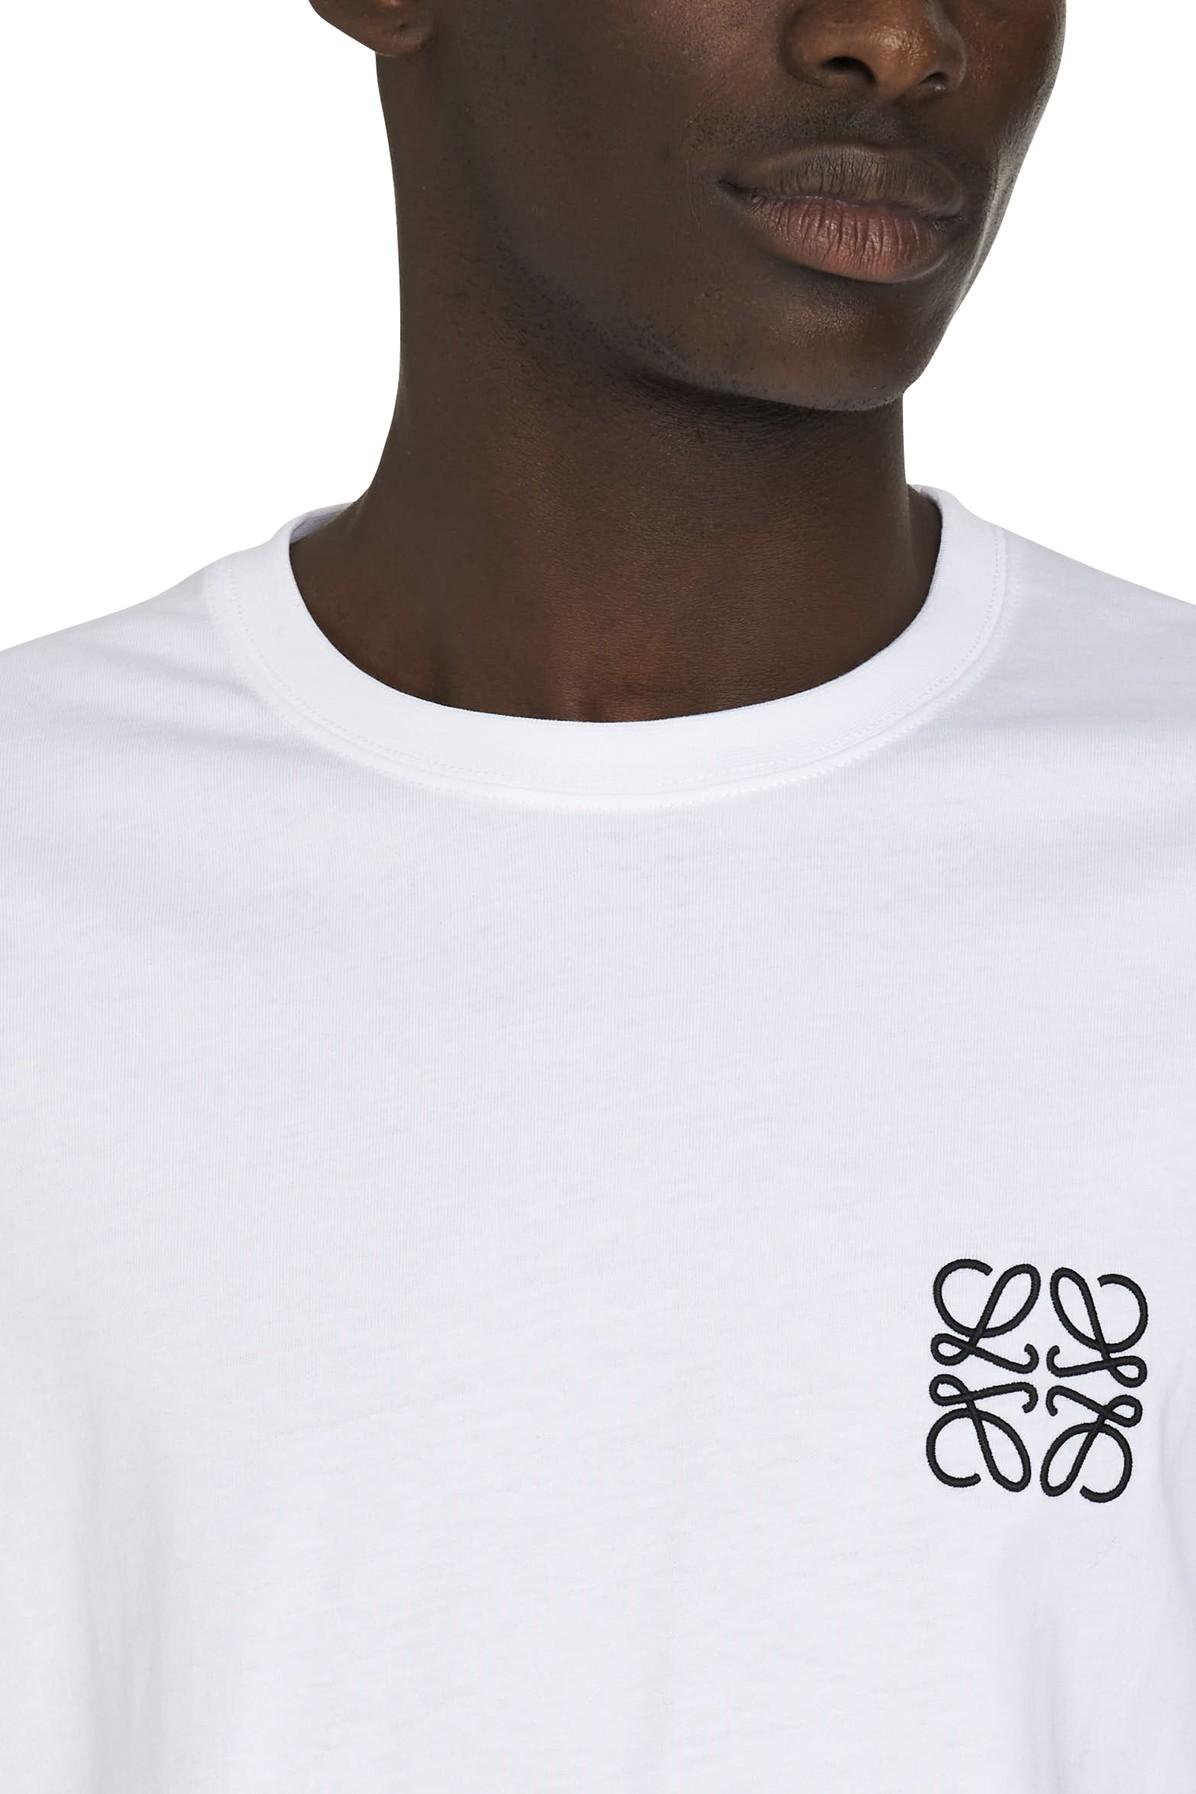 Loewe Cotton Anagram T-shirt in White for Men | Lyst